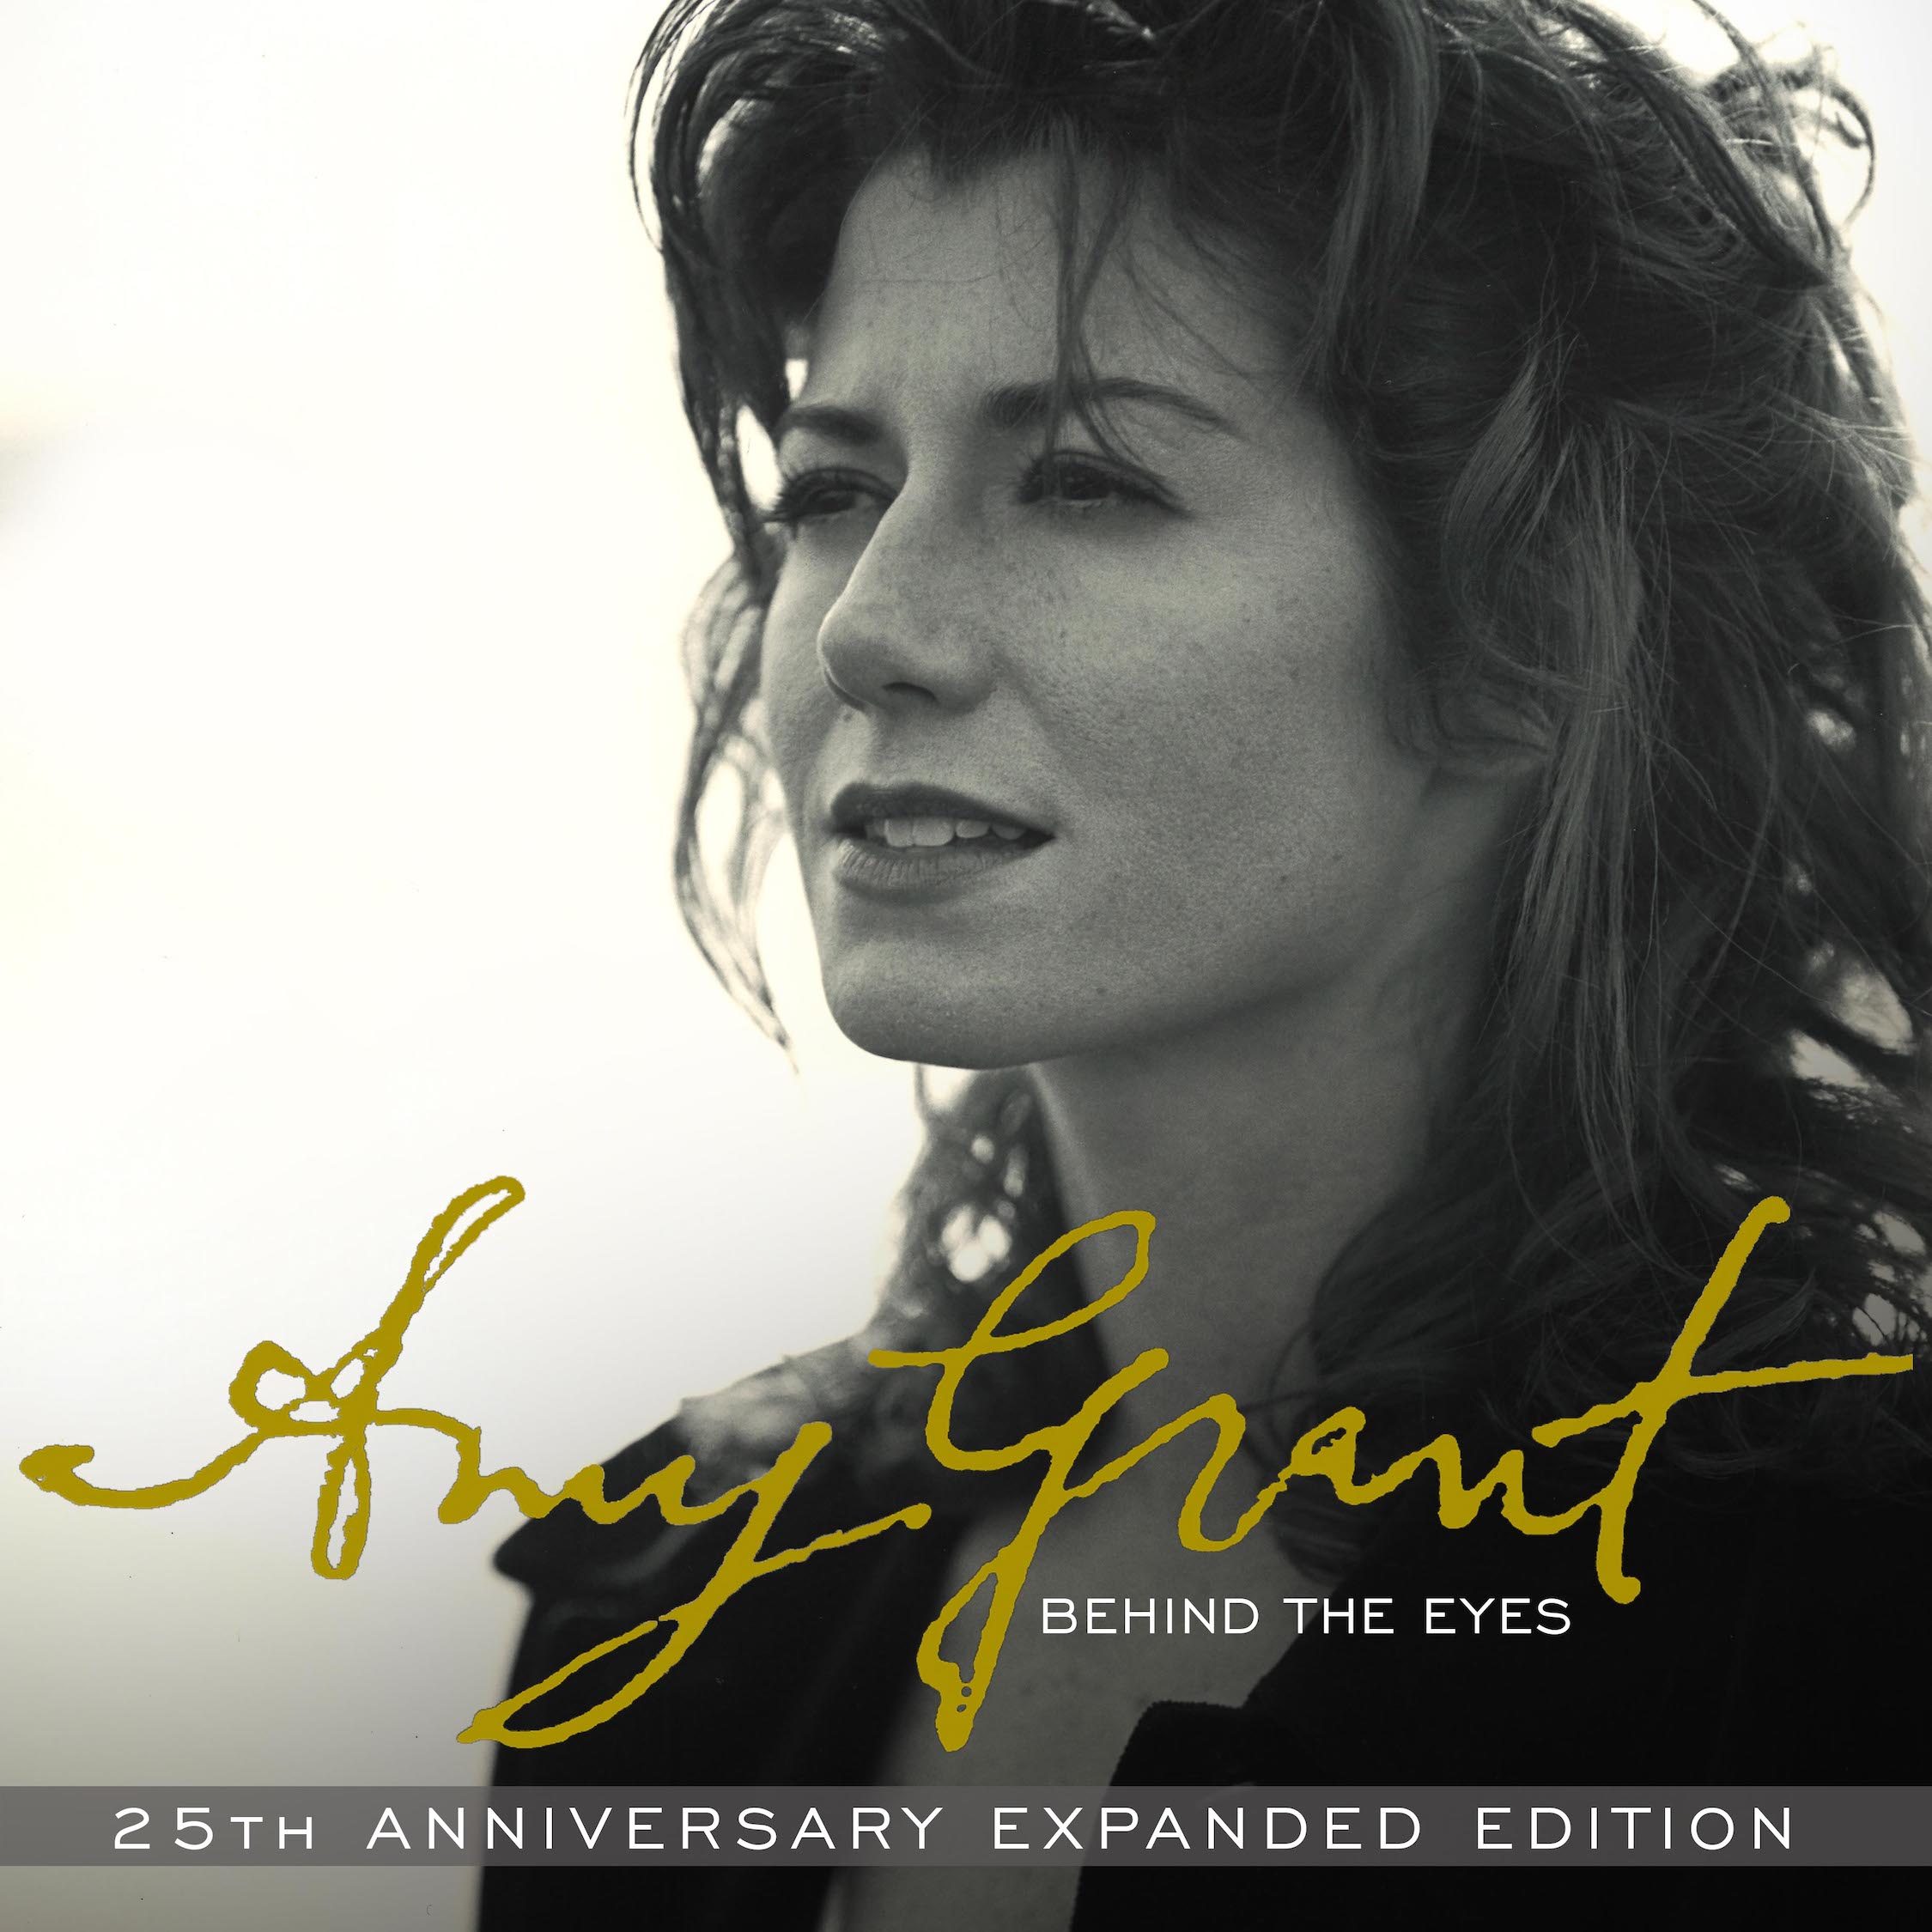 Amy Grant, `Behind The Eyes (25th Anniversary Expanded Edition)` (Images courtesy of The Media Collective)